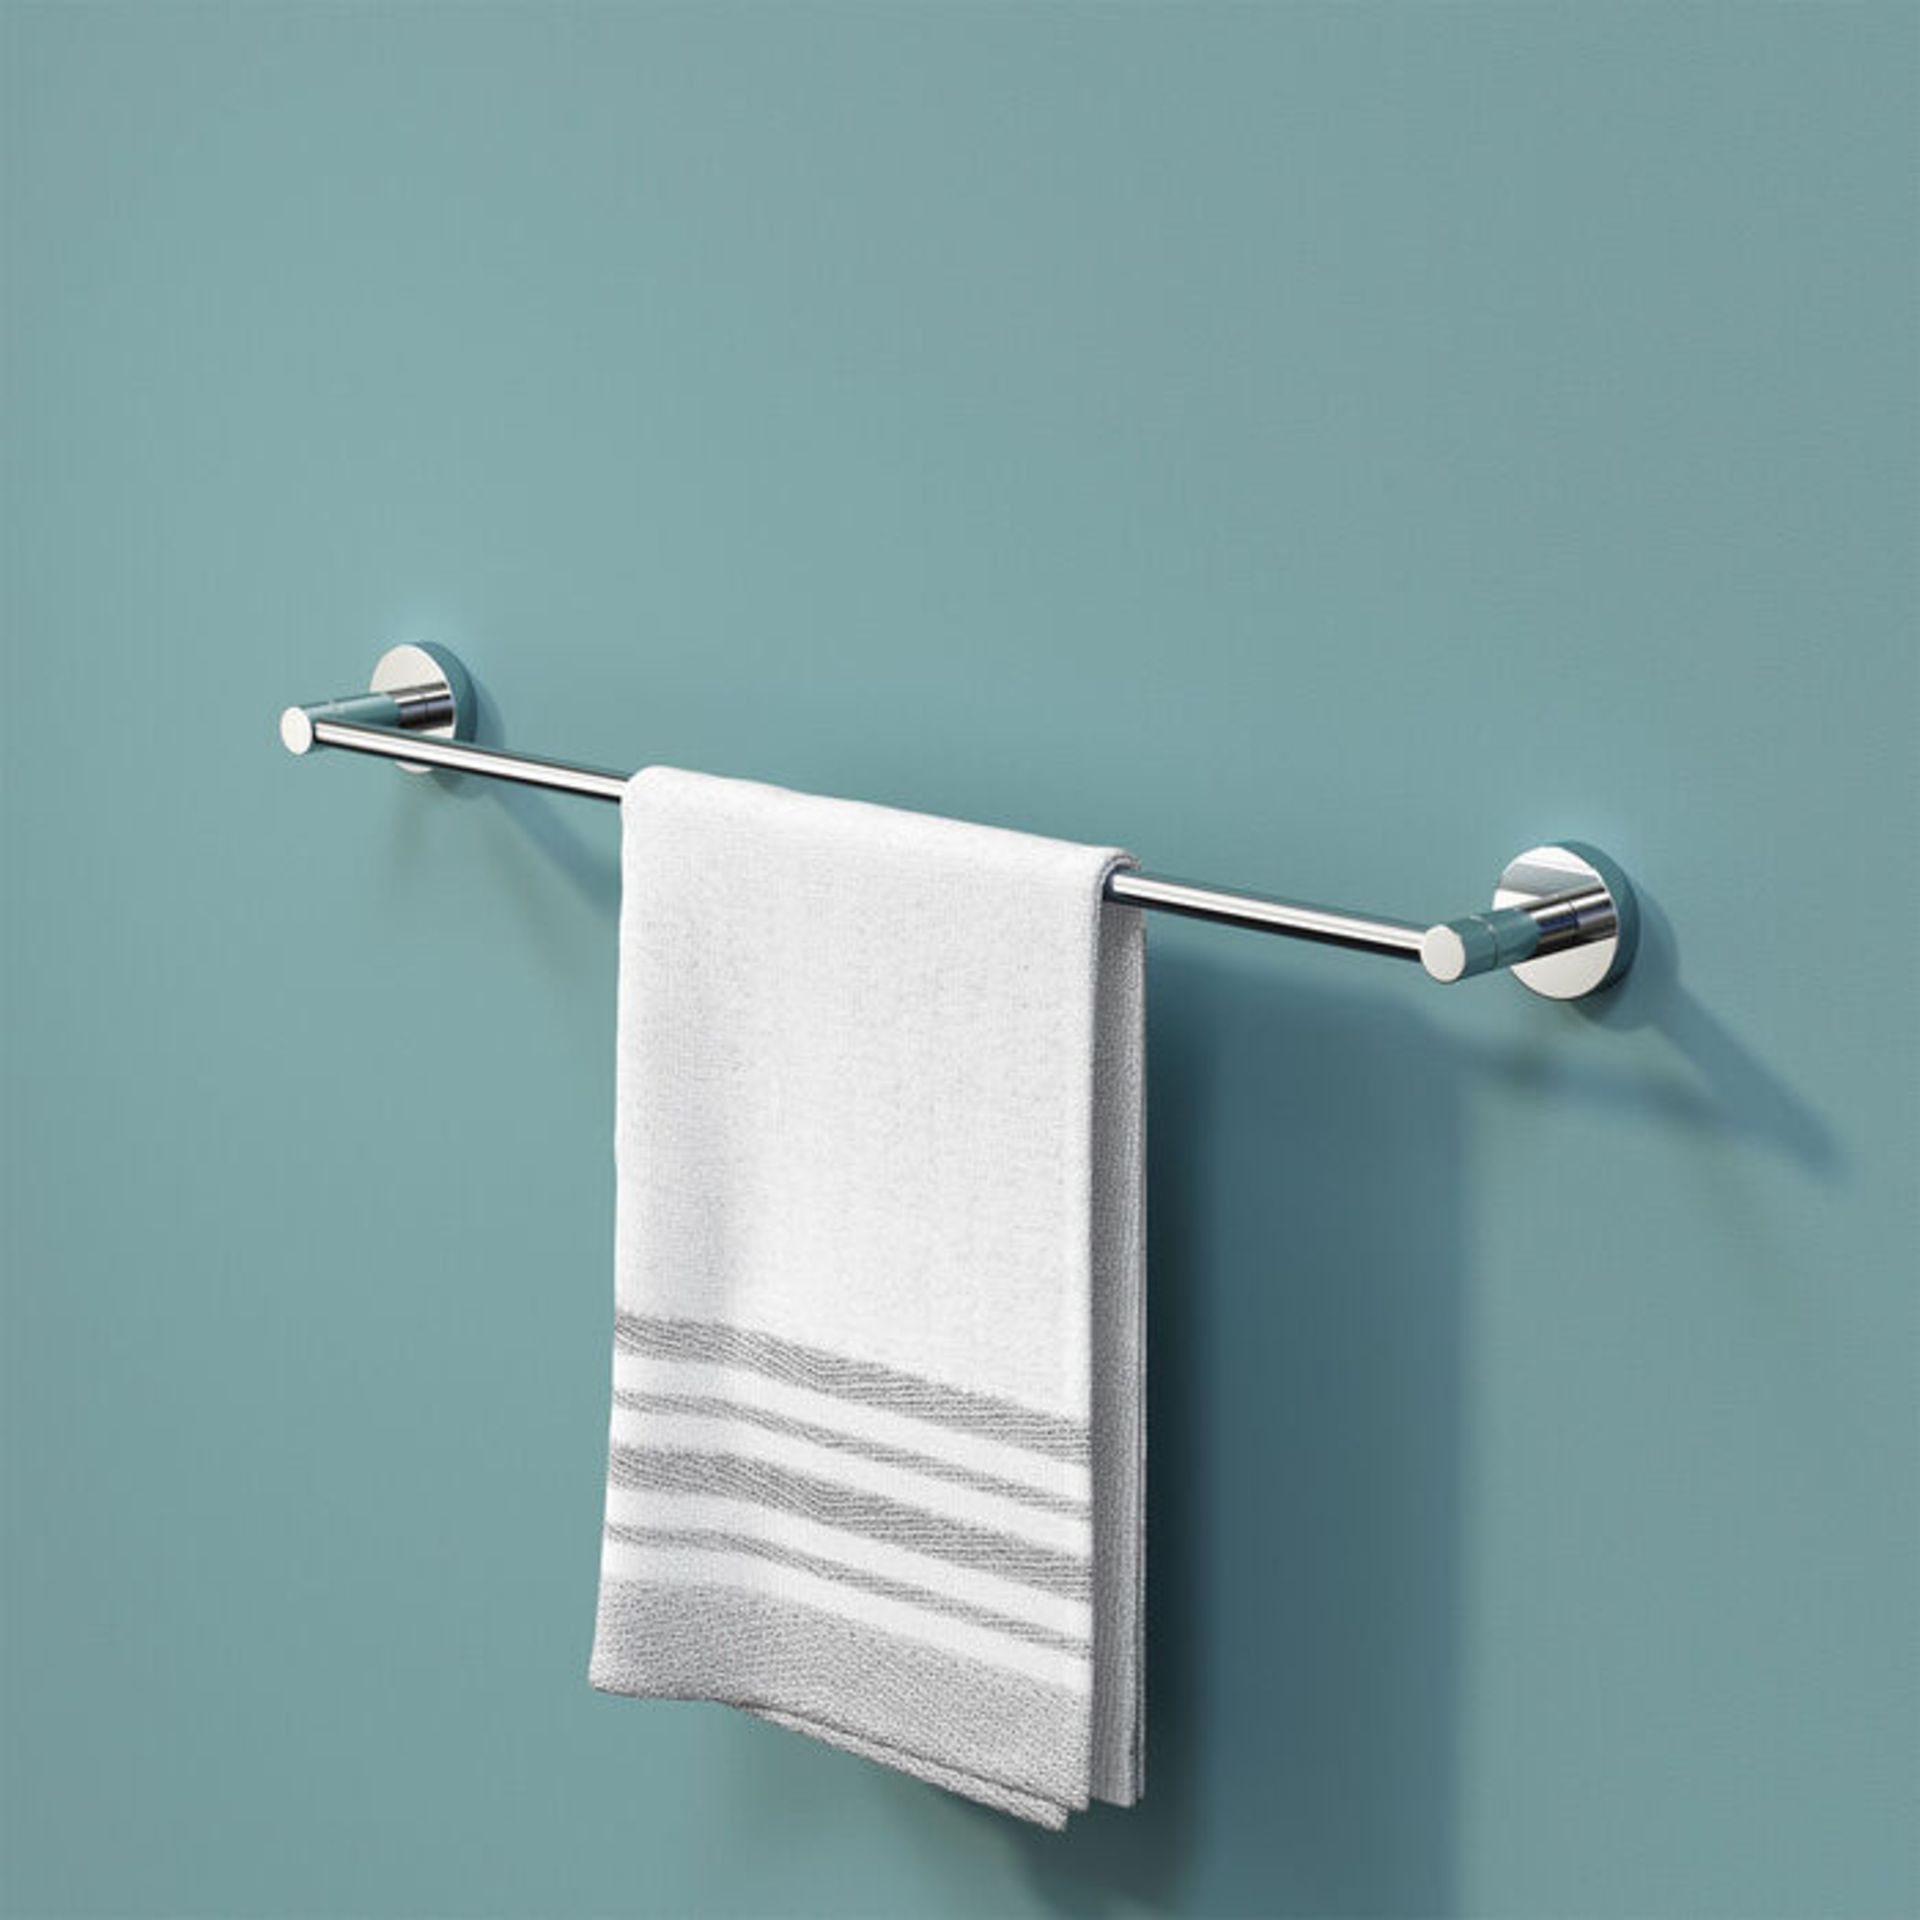 (PM1015) Finsbury Towel Rail. Designed to conceal all fittings Completes your bathroom with a...